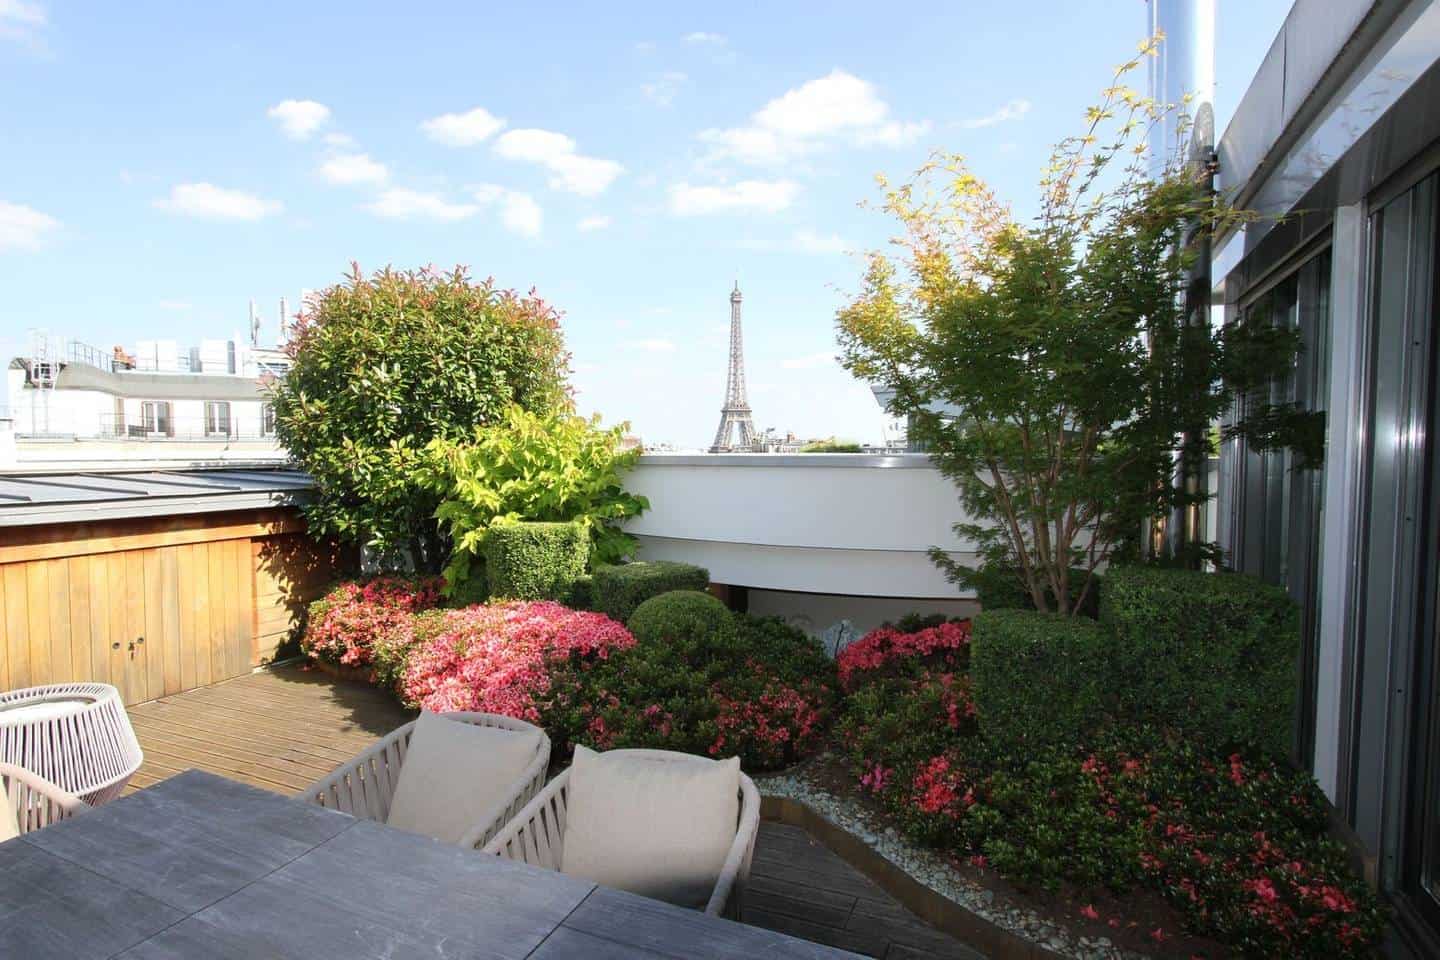 Wow! This Airbnb Paris listing near Eiffel Tower is dreamy. You have to see the pictures!